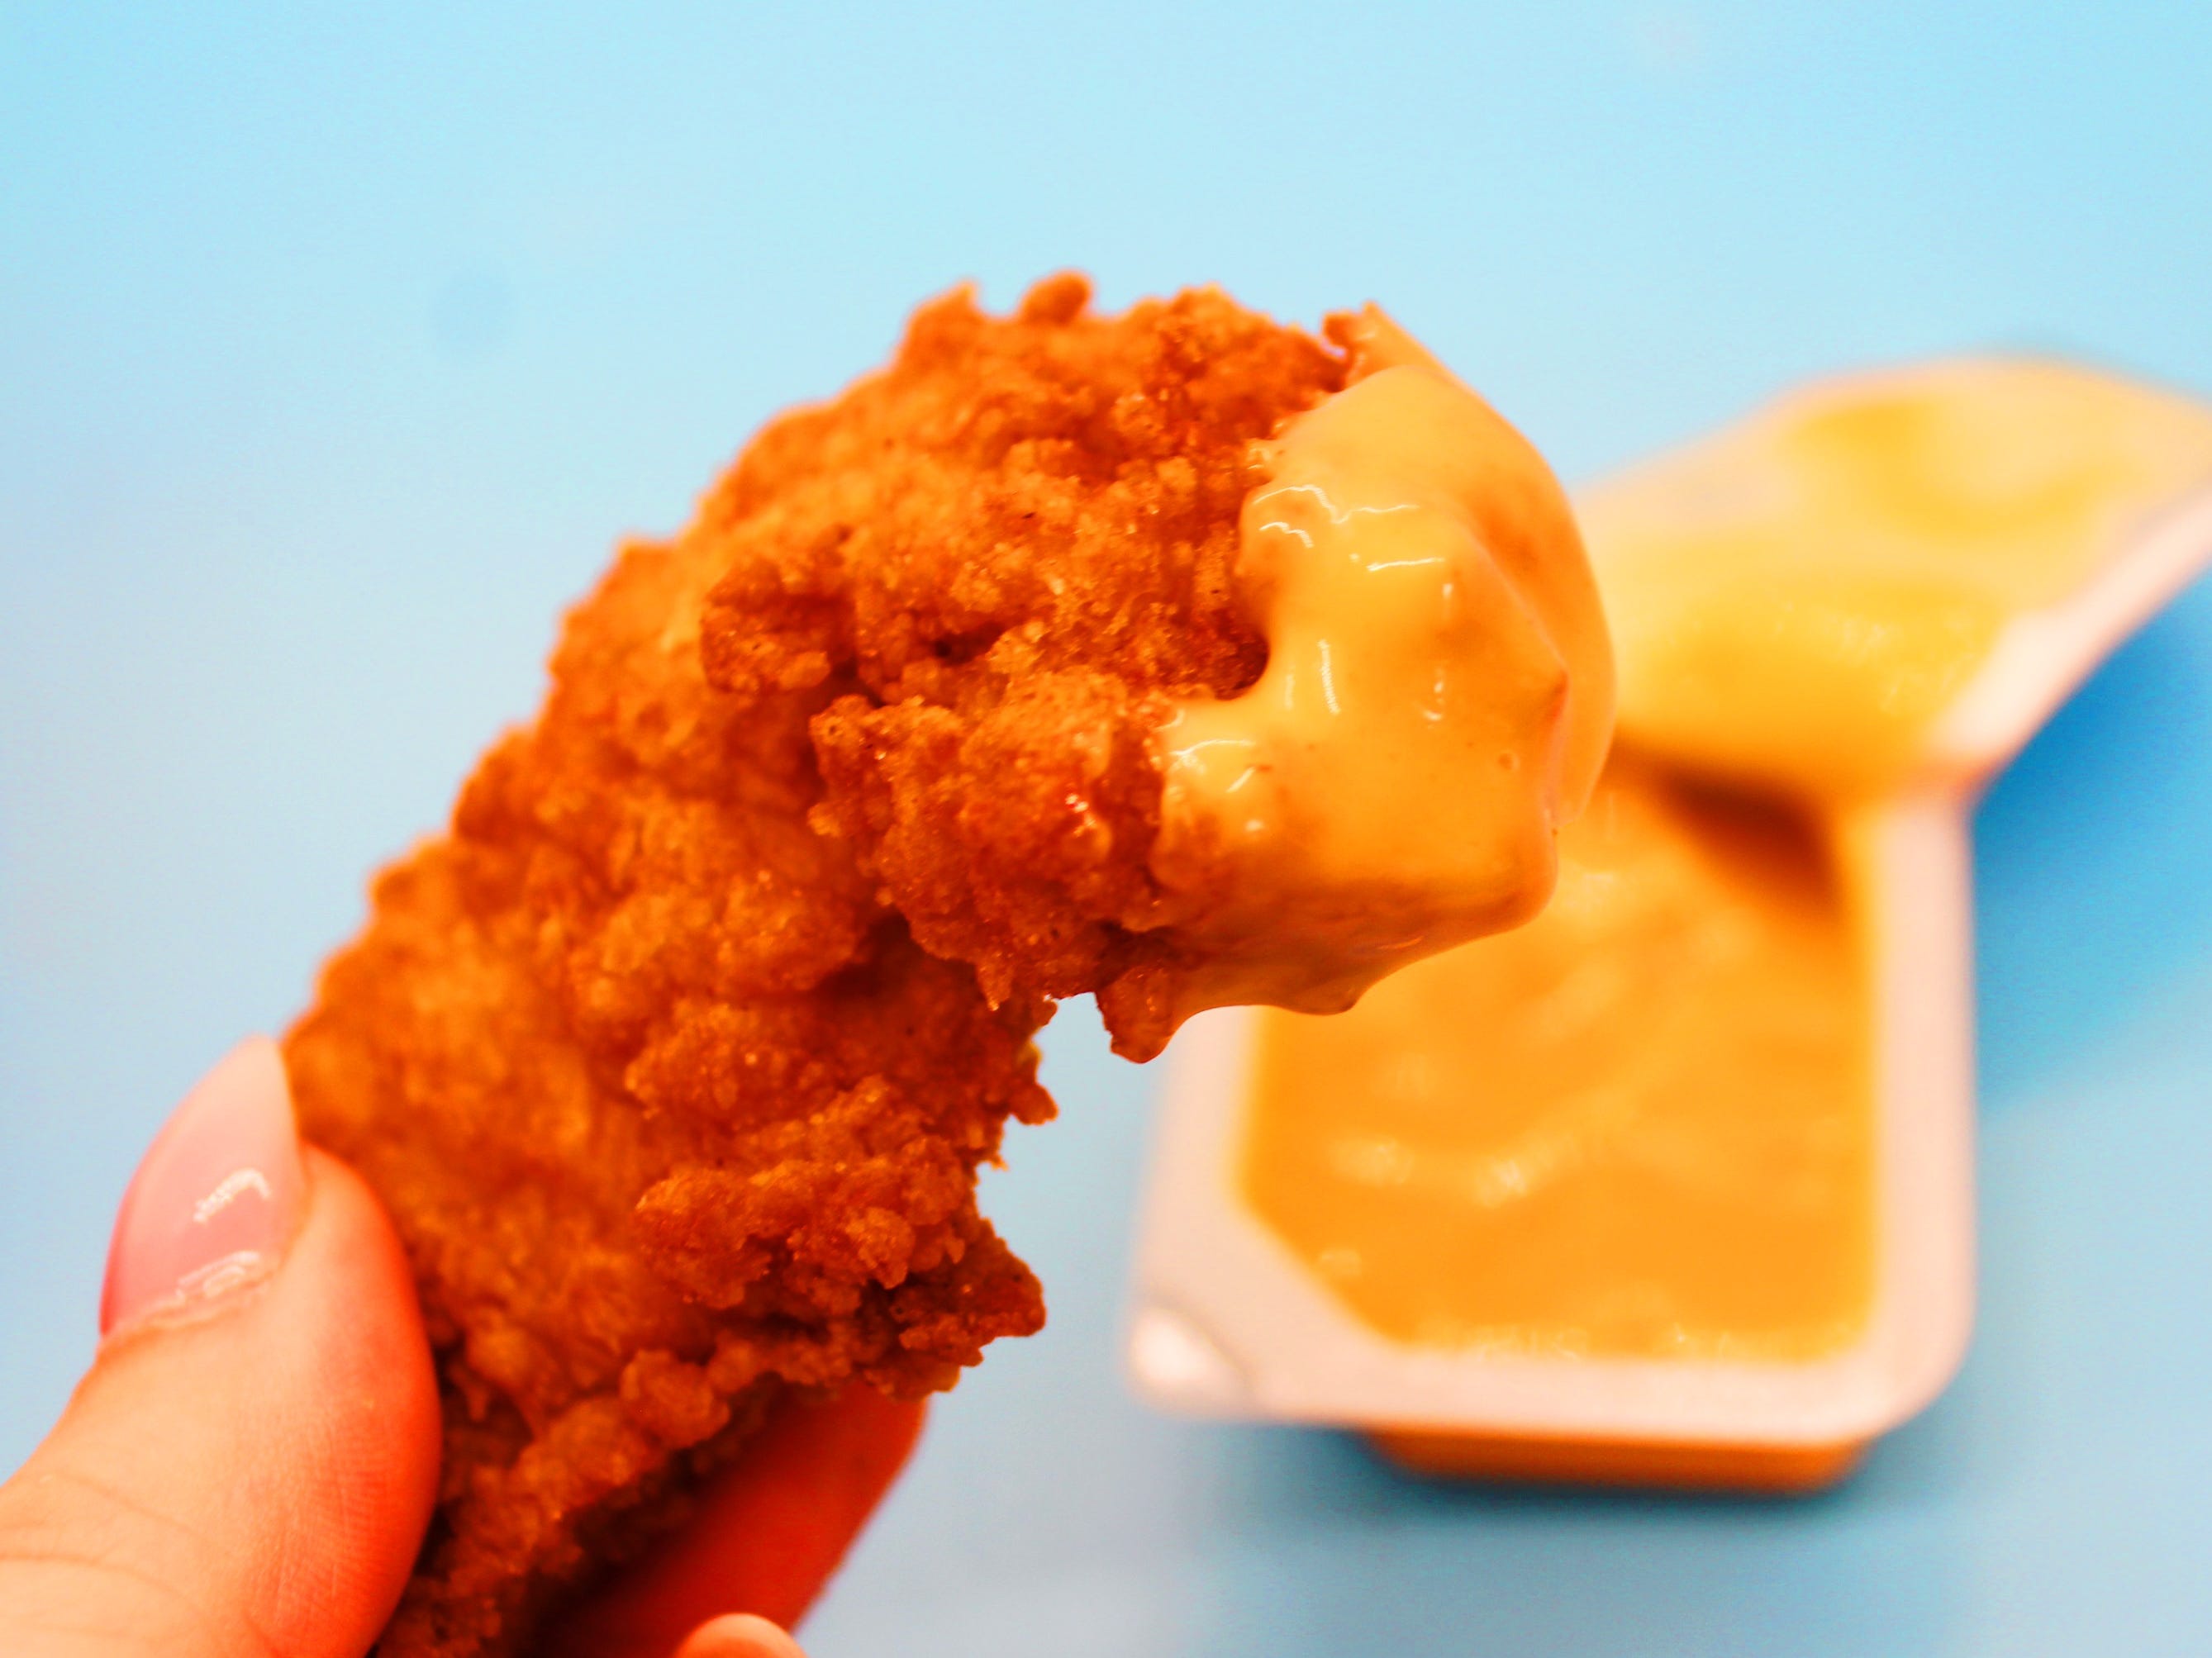 Chick fil a Hühnchenfilets in Chick fil a Sauce getaucht